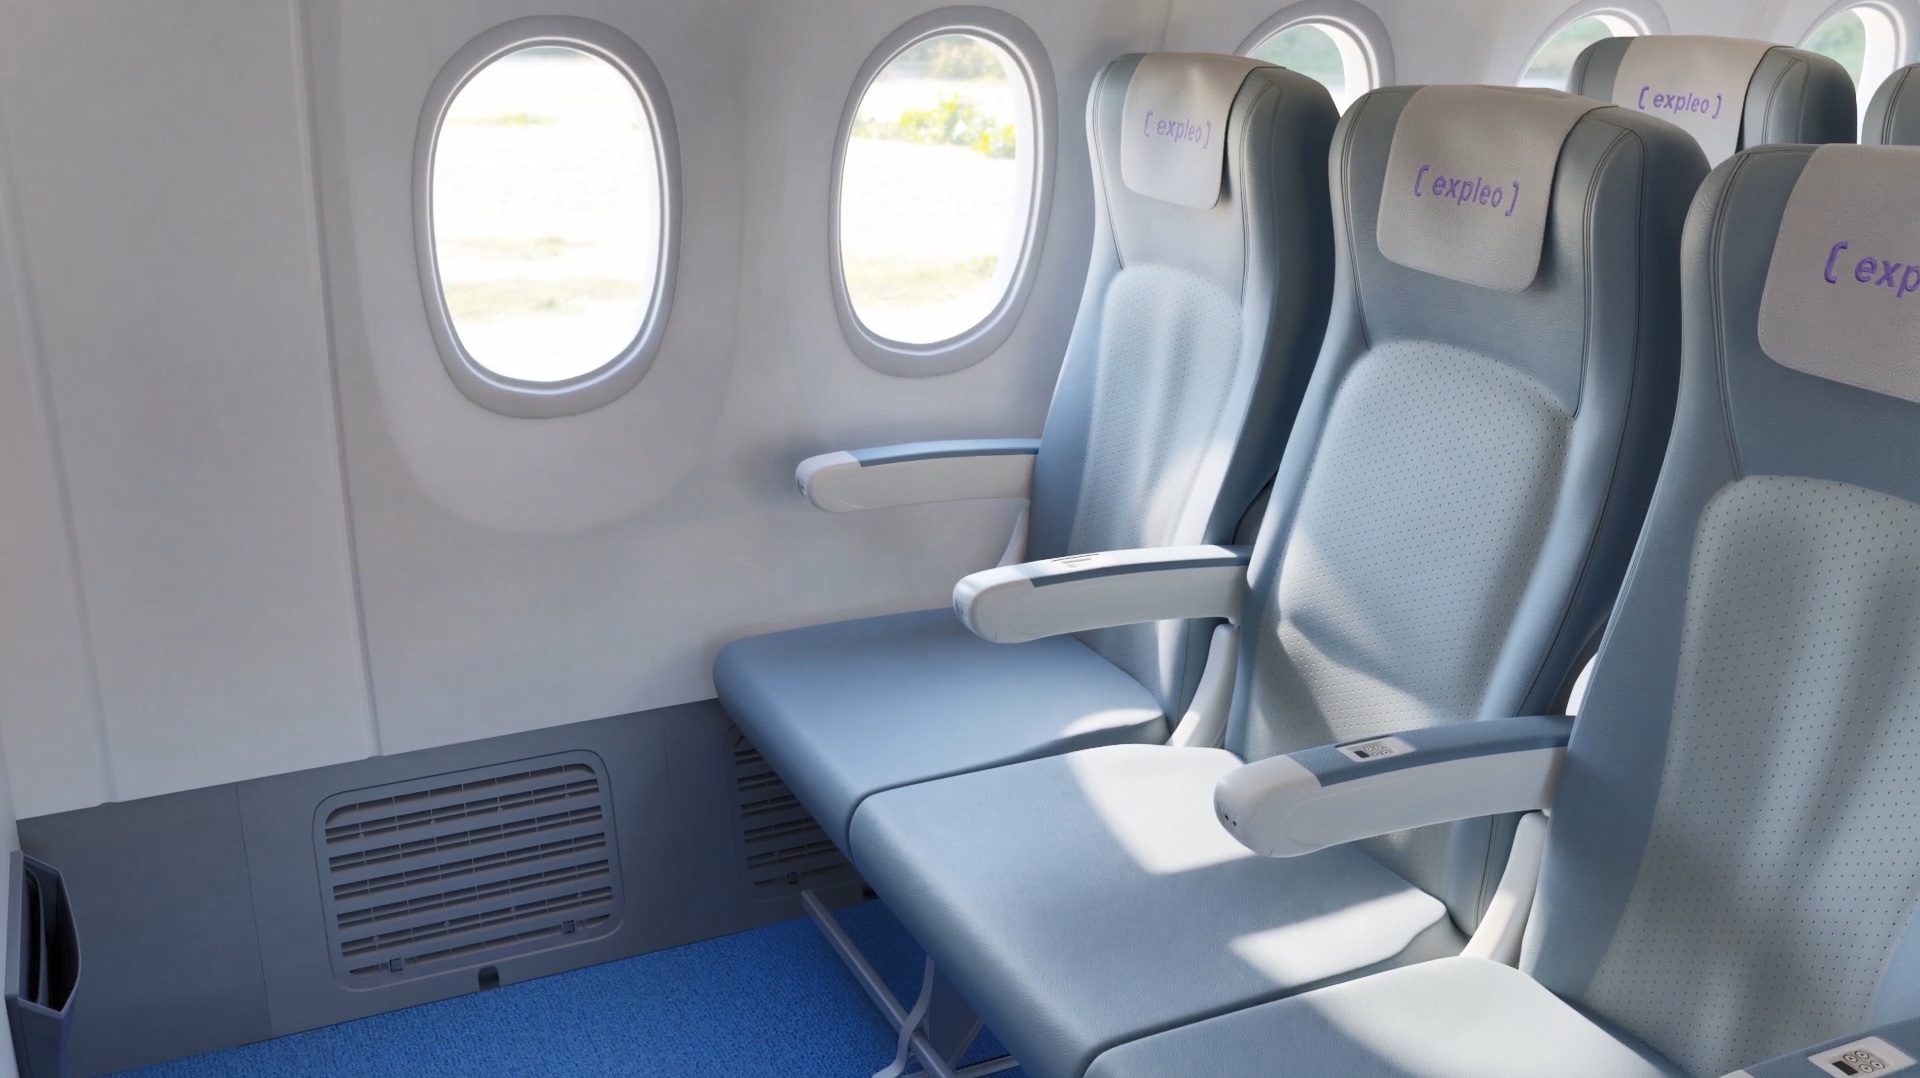 Materialise has previously worked with aerospace design firm Expleo to design a 3D-printed part that reinforced vulnerable zones in the Boeing 737 dado panel. Photo via Materialise.